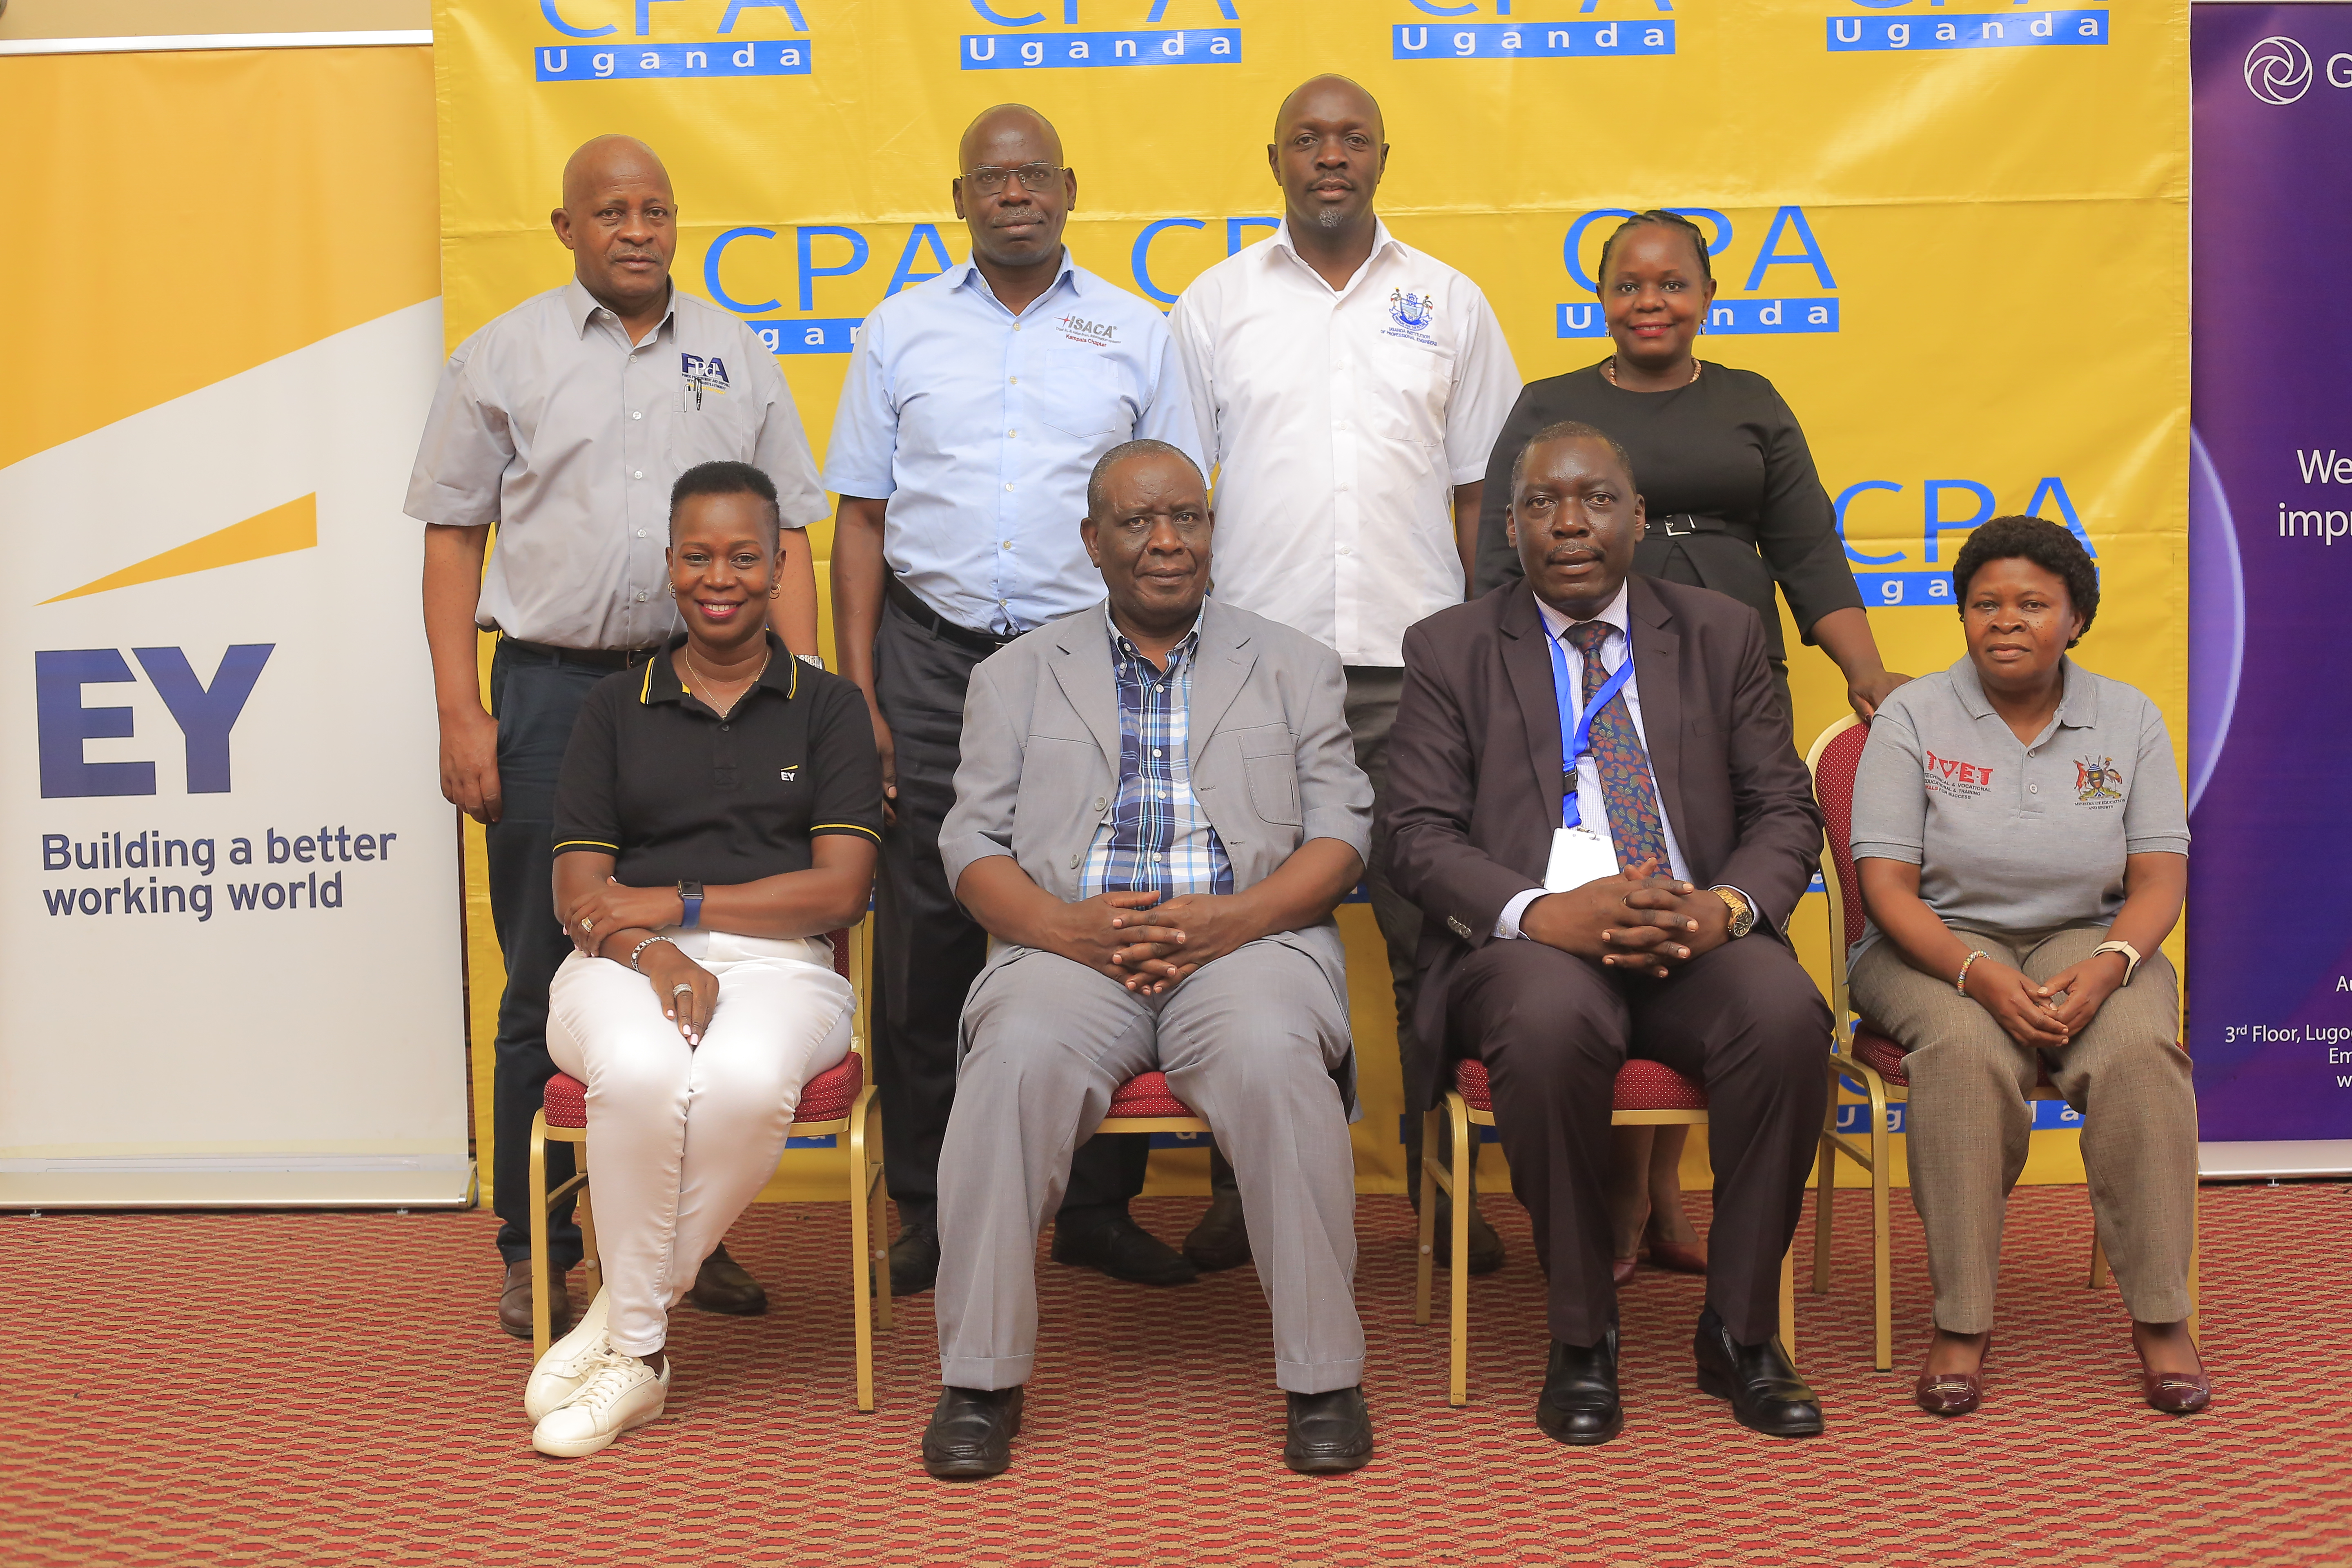 Some of ICPAU’s Council members and Events Management Committee with the afternoon session speaker  Mr Ndebesa Mwambutsya at the 12th Economic Forum. Standing (L-R) are CPA David Sserebe,CPA Albert Otete, Eng Steven Serunjogi, CPA Joselyne Nakasi. Seated (L-R) CPA Sandra Nakibuule Batte, Mr Ndebesa Mwambutsya, CPA Michael Wanyama & Ms Elizabeth Kateme.